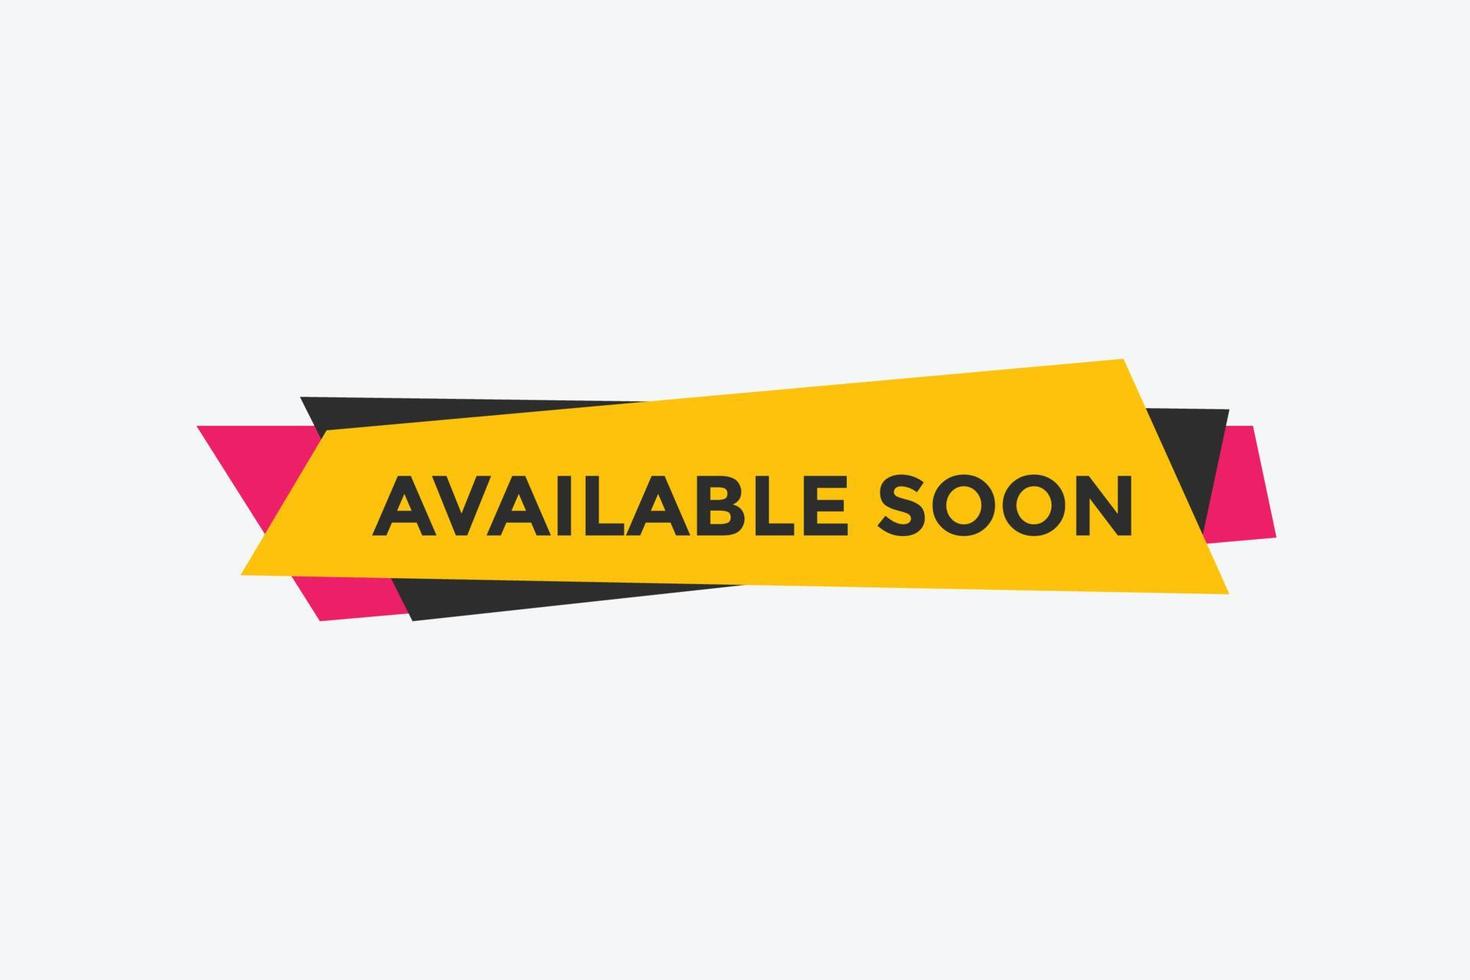 available soon button. available soon text template for website. available soon icon flat style vector